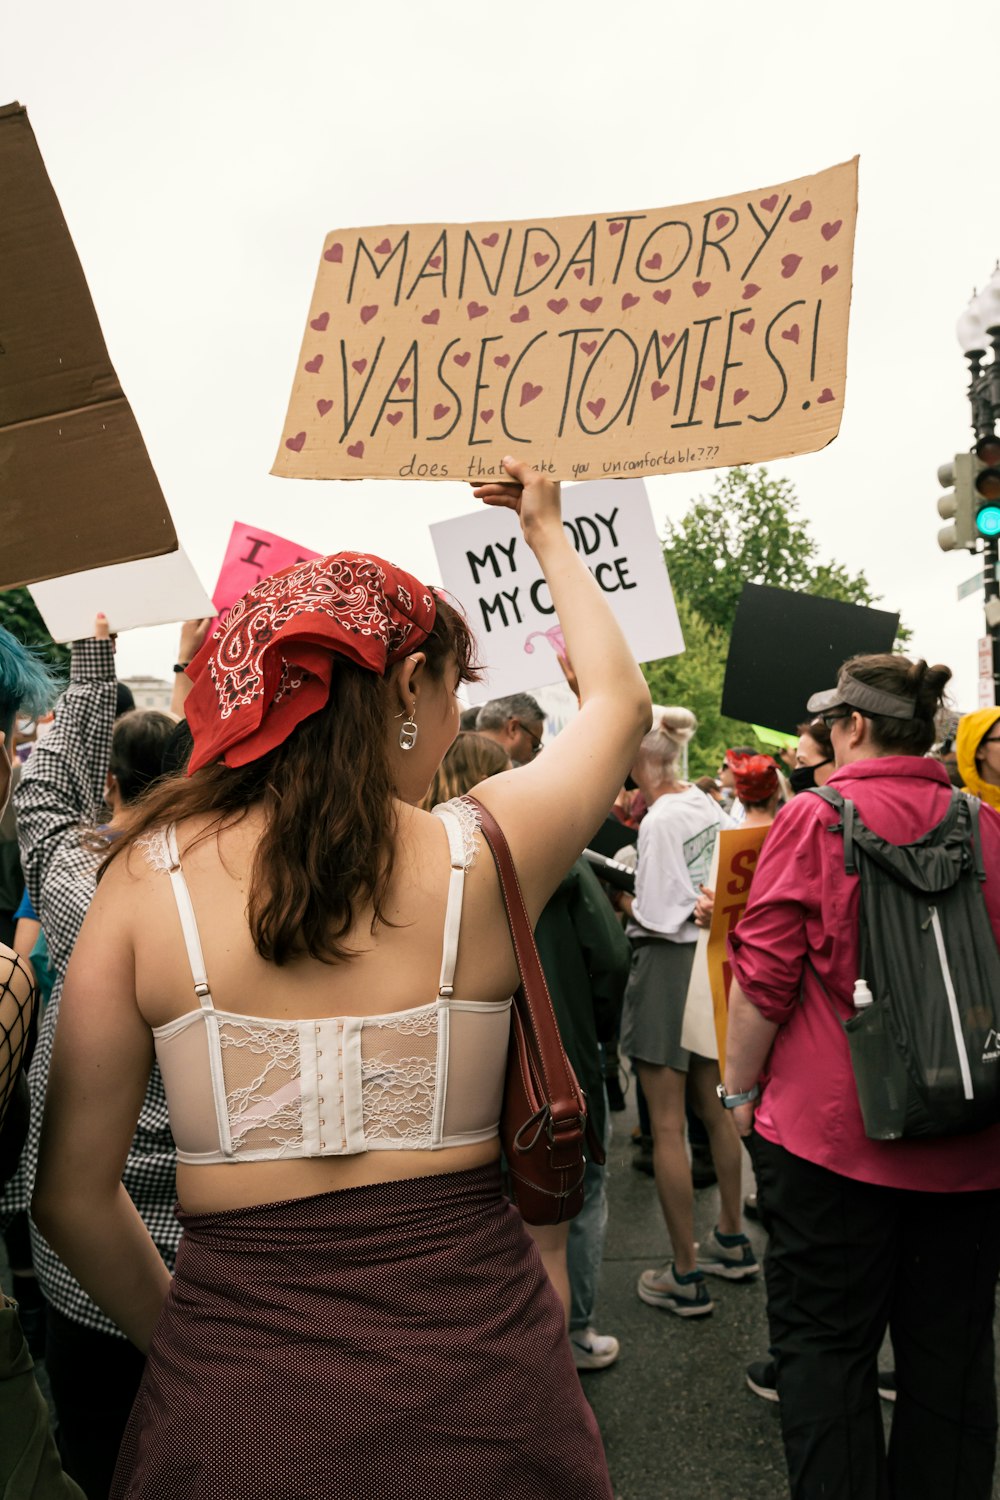 a group of people standing next to a woman holding a sign